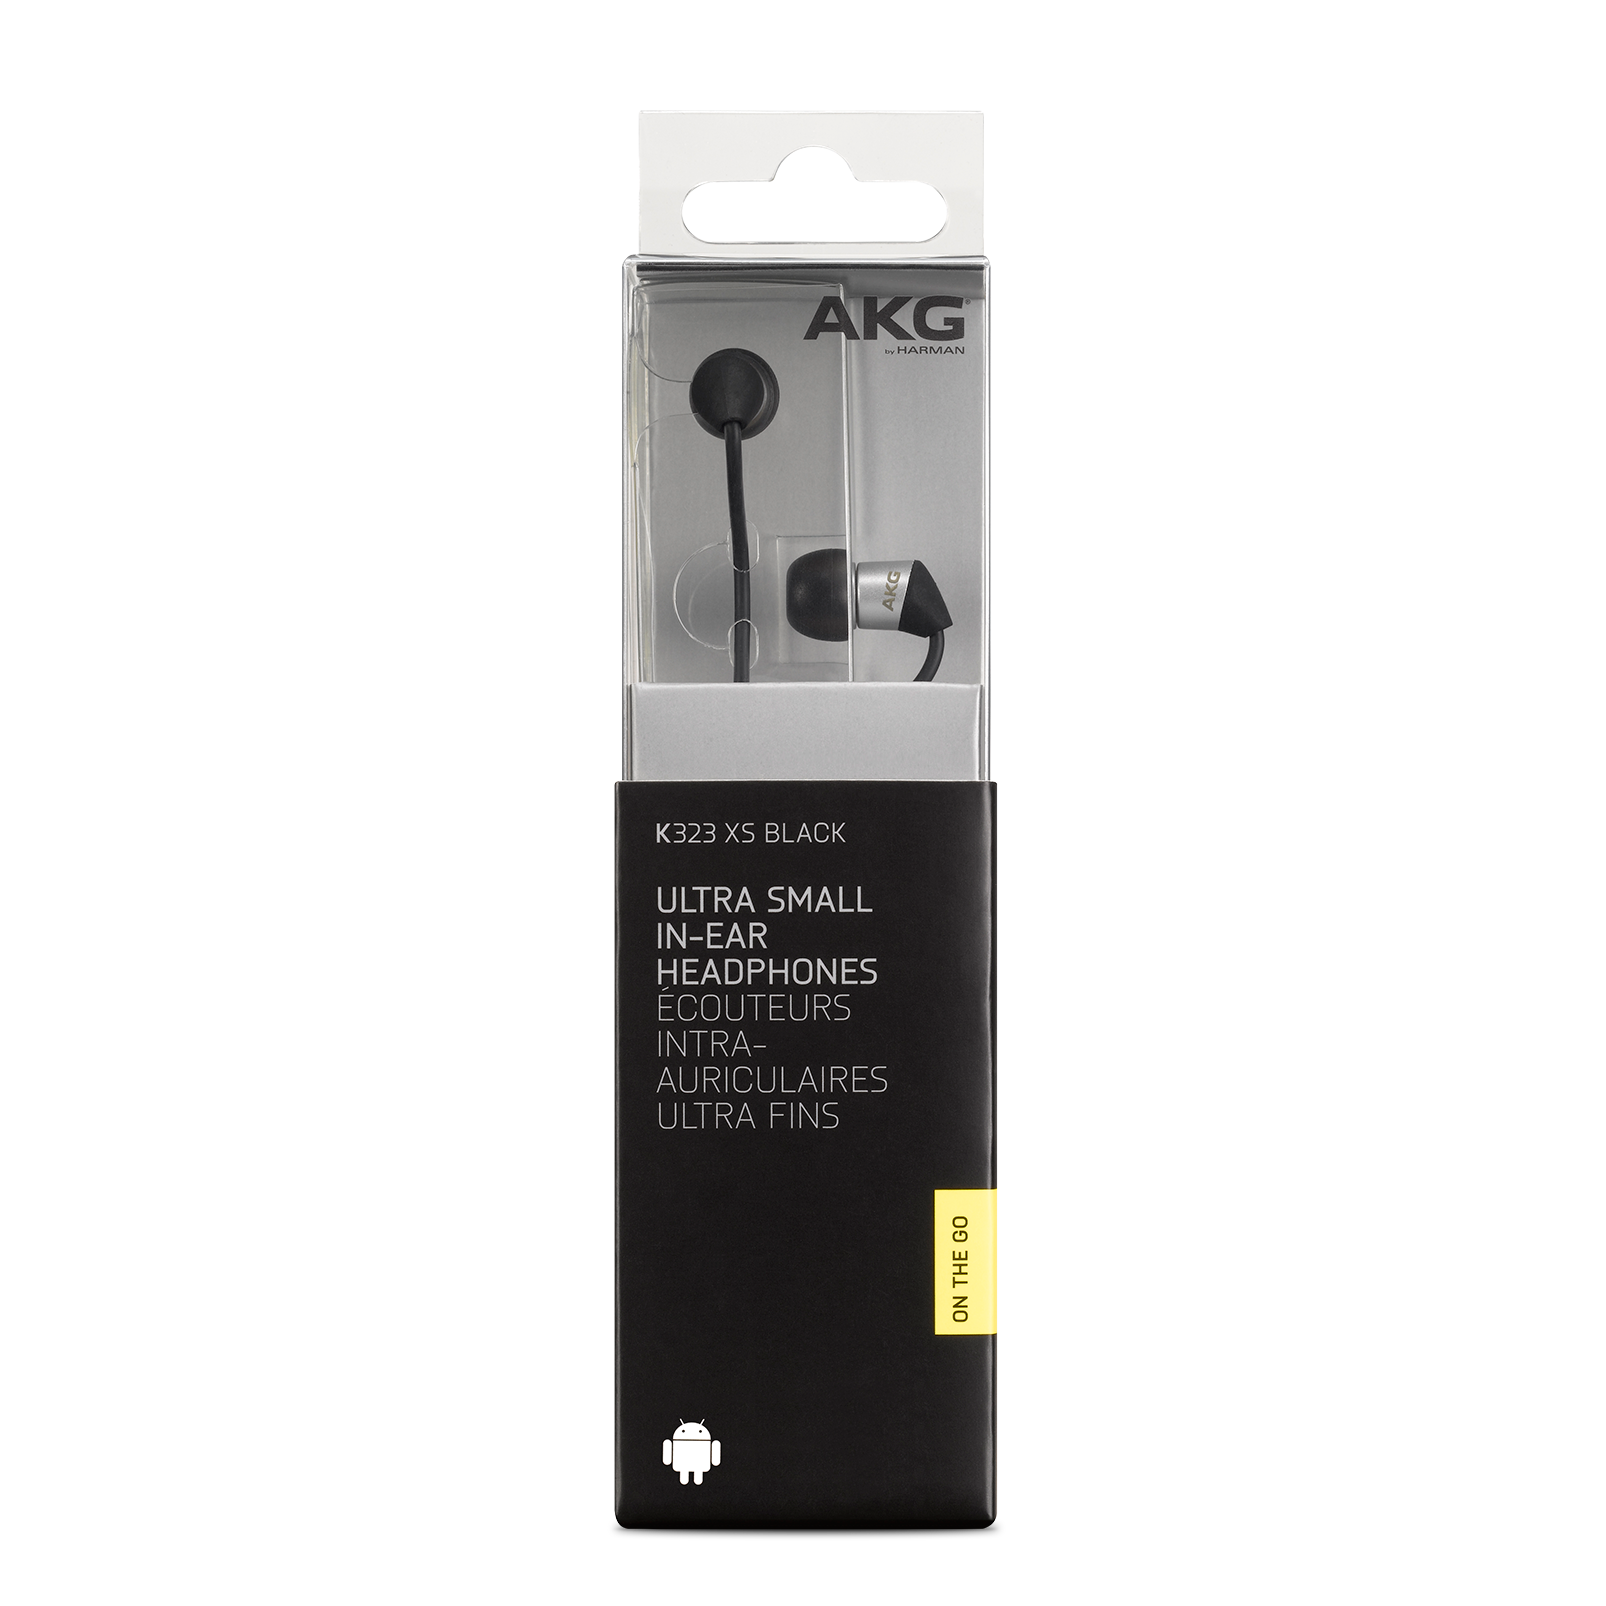 K323XS  The smallest in-ear headphones with AKG signature sound